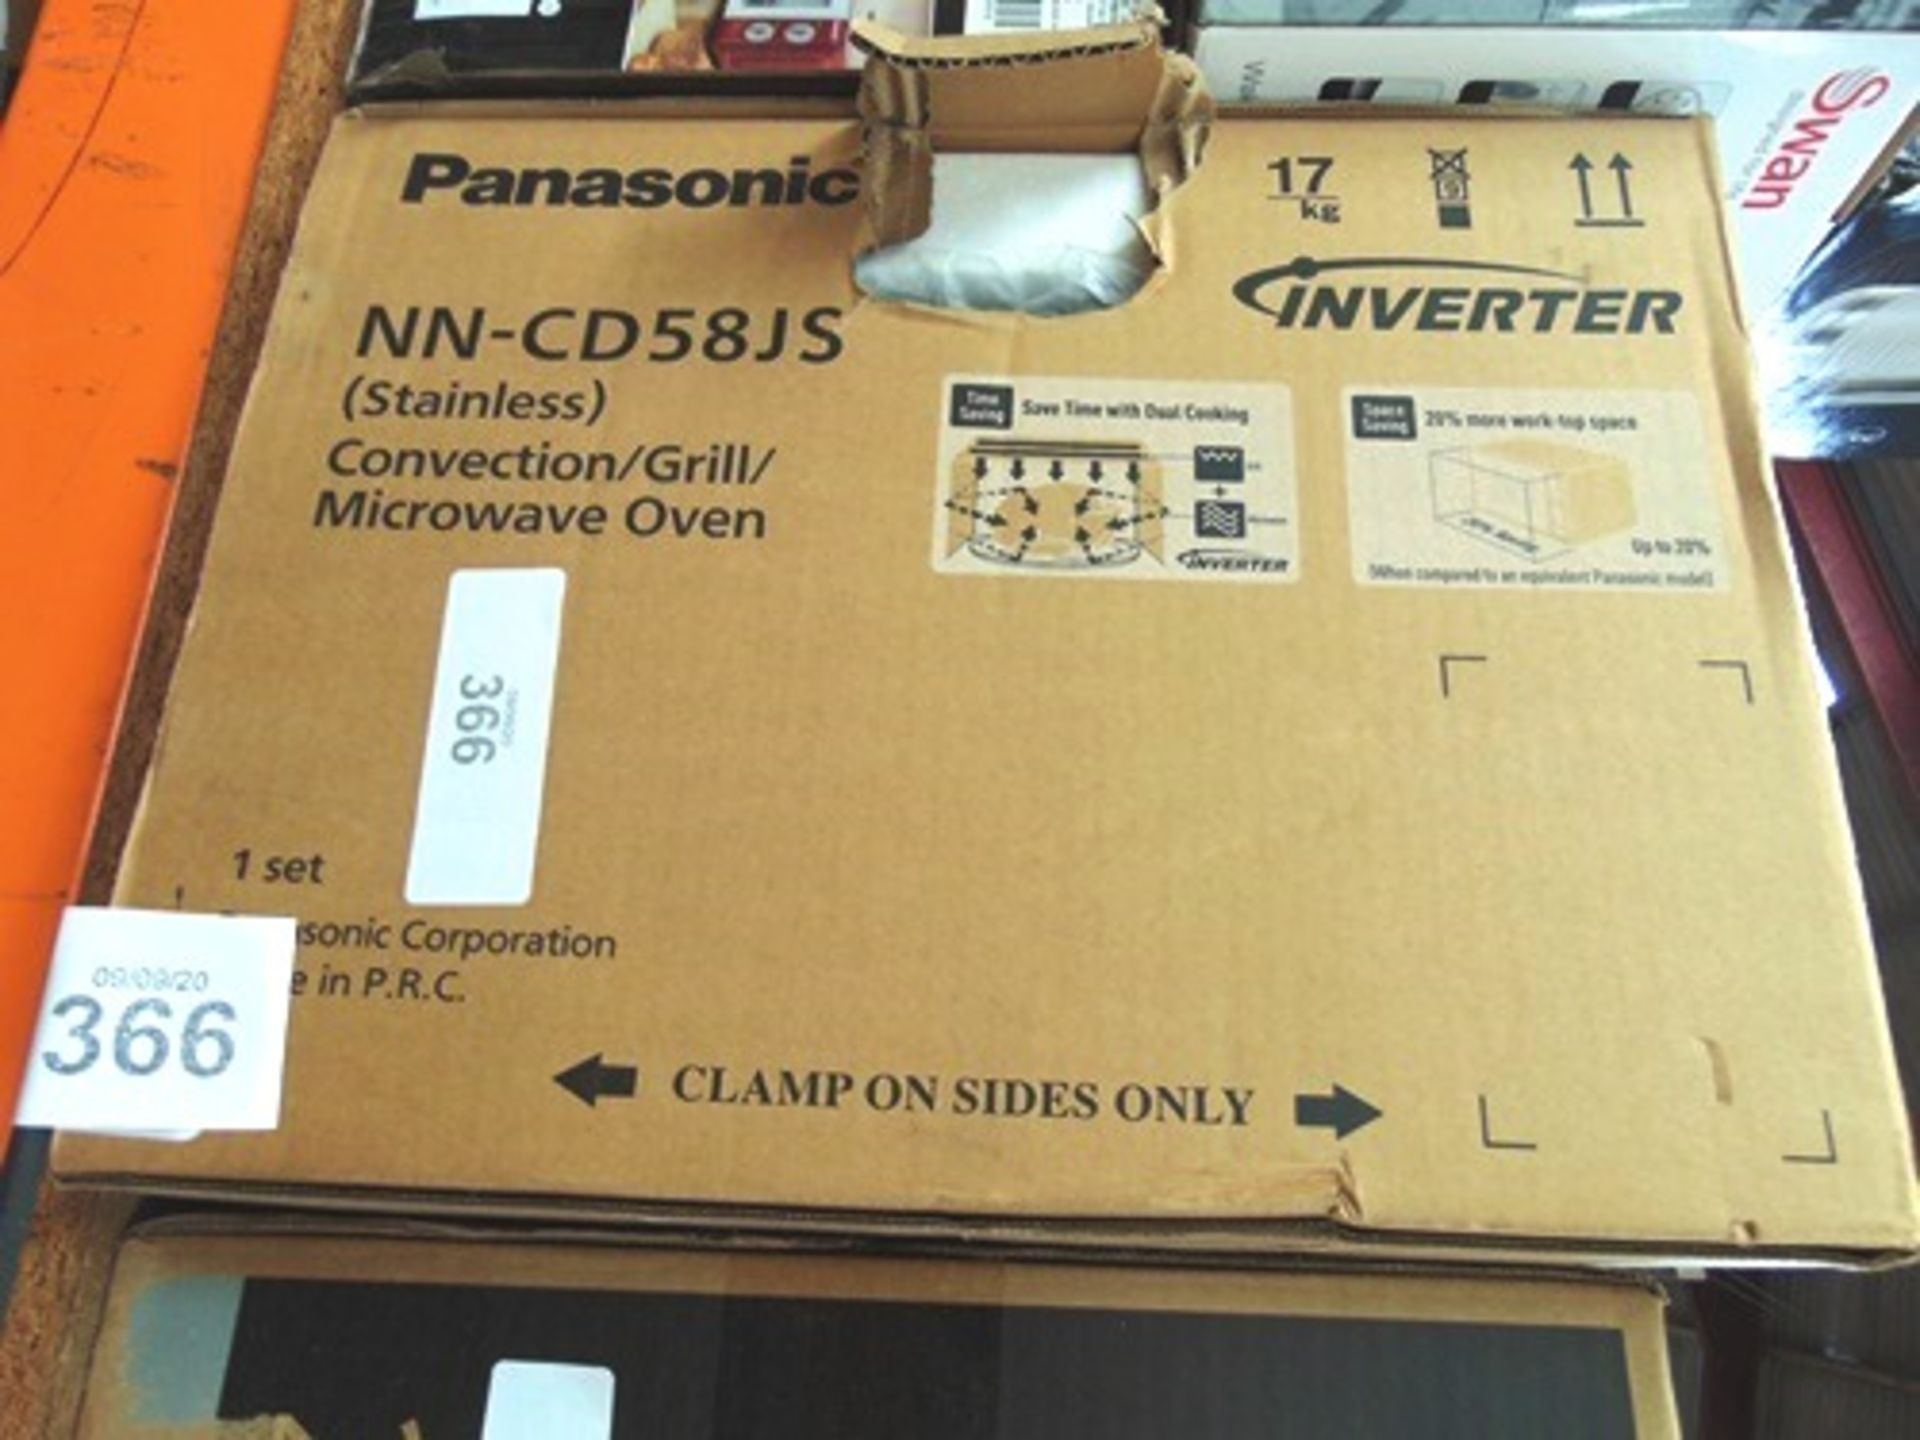 Panasonic inverter microwave/grill oven, 100W, 27ltr, NN-CD58JS - Sealed new in box (ES1A) - Image 3 of 3